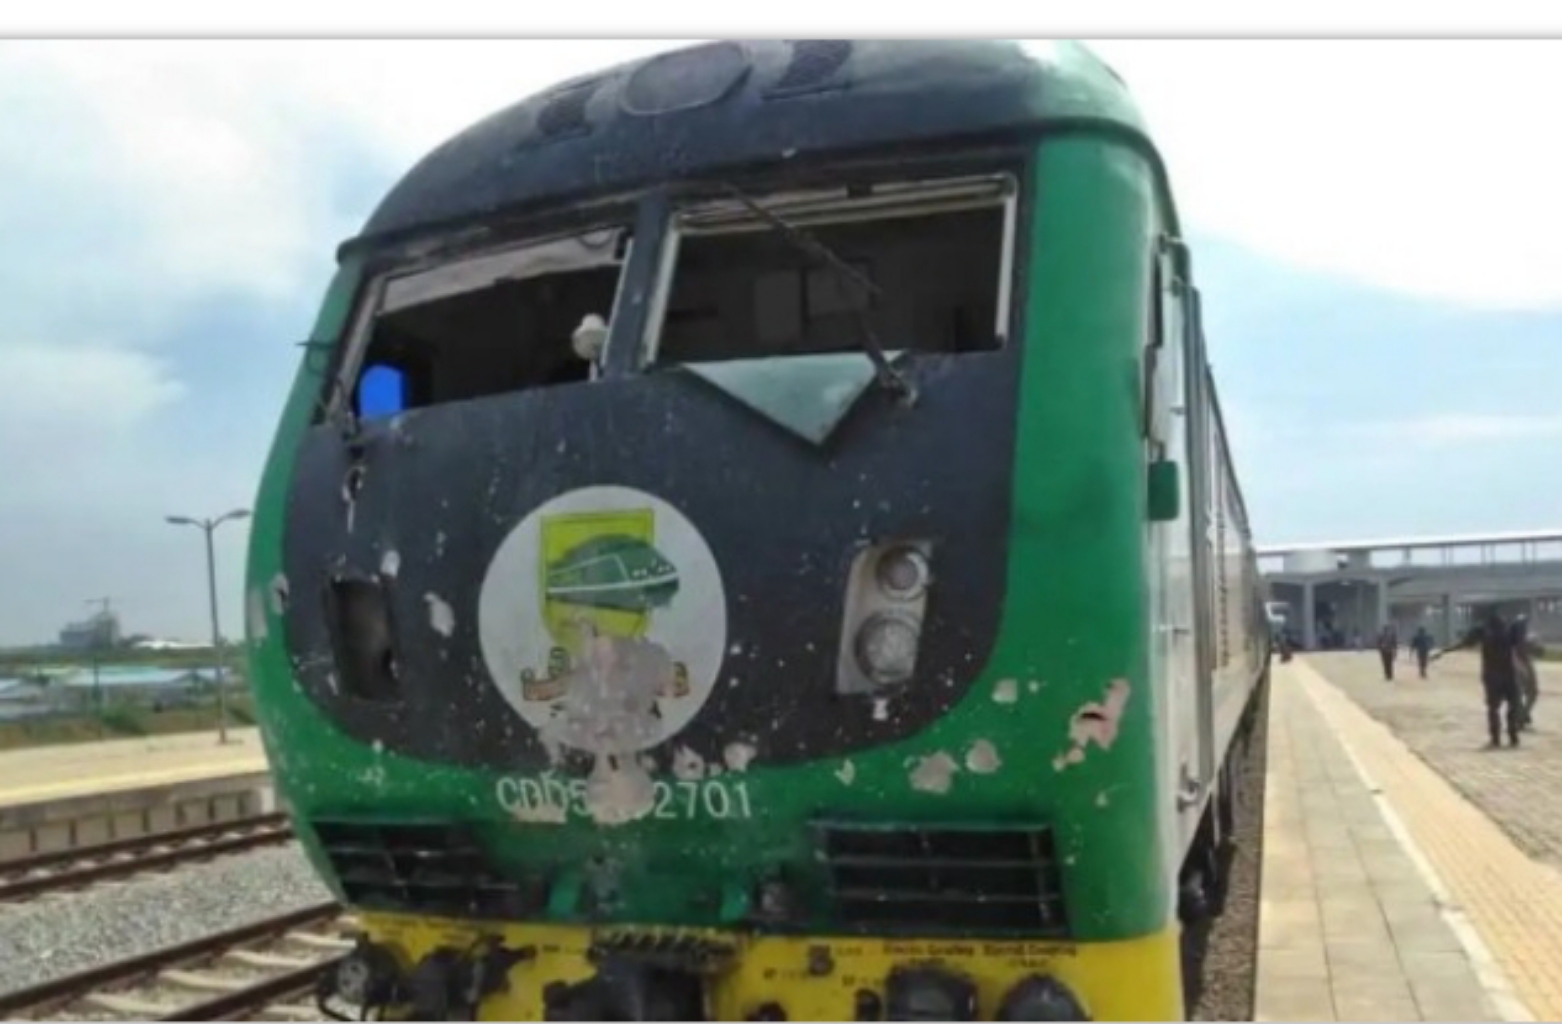 SECURITY FORCES RESCUE 6 VICTIMS OF EDO TRAIN TERROR ATTACK